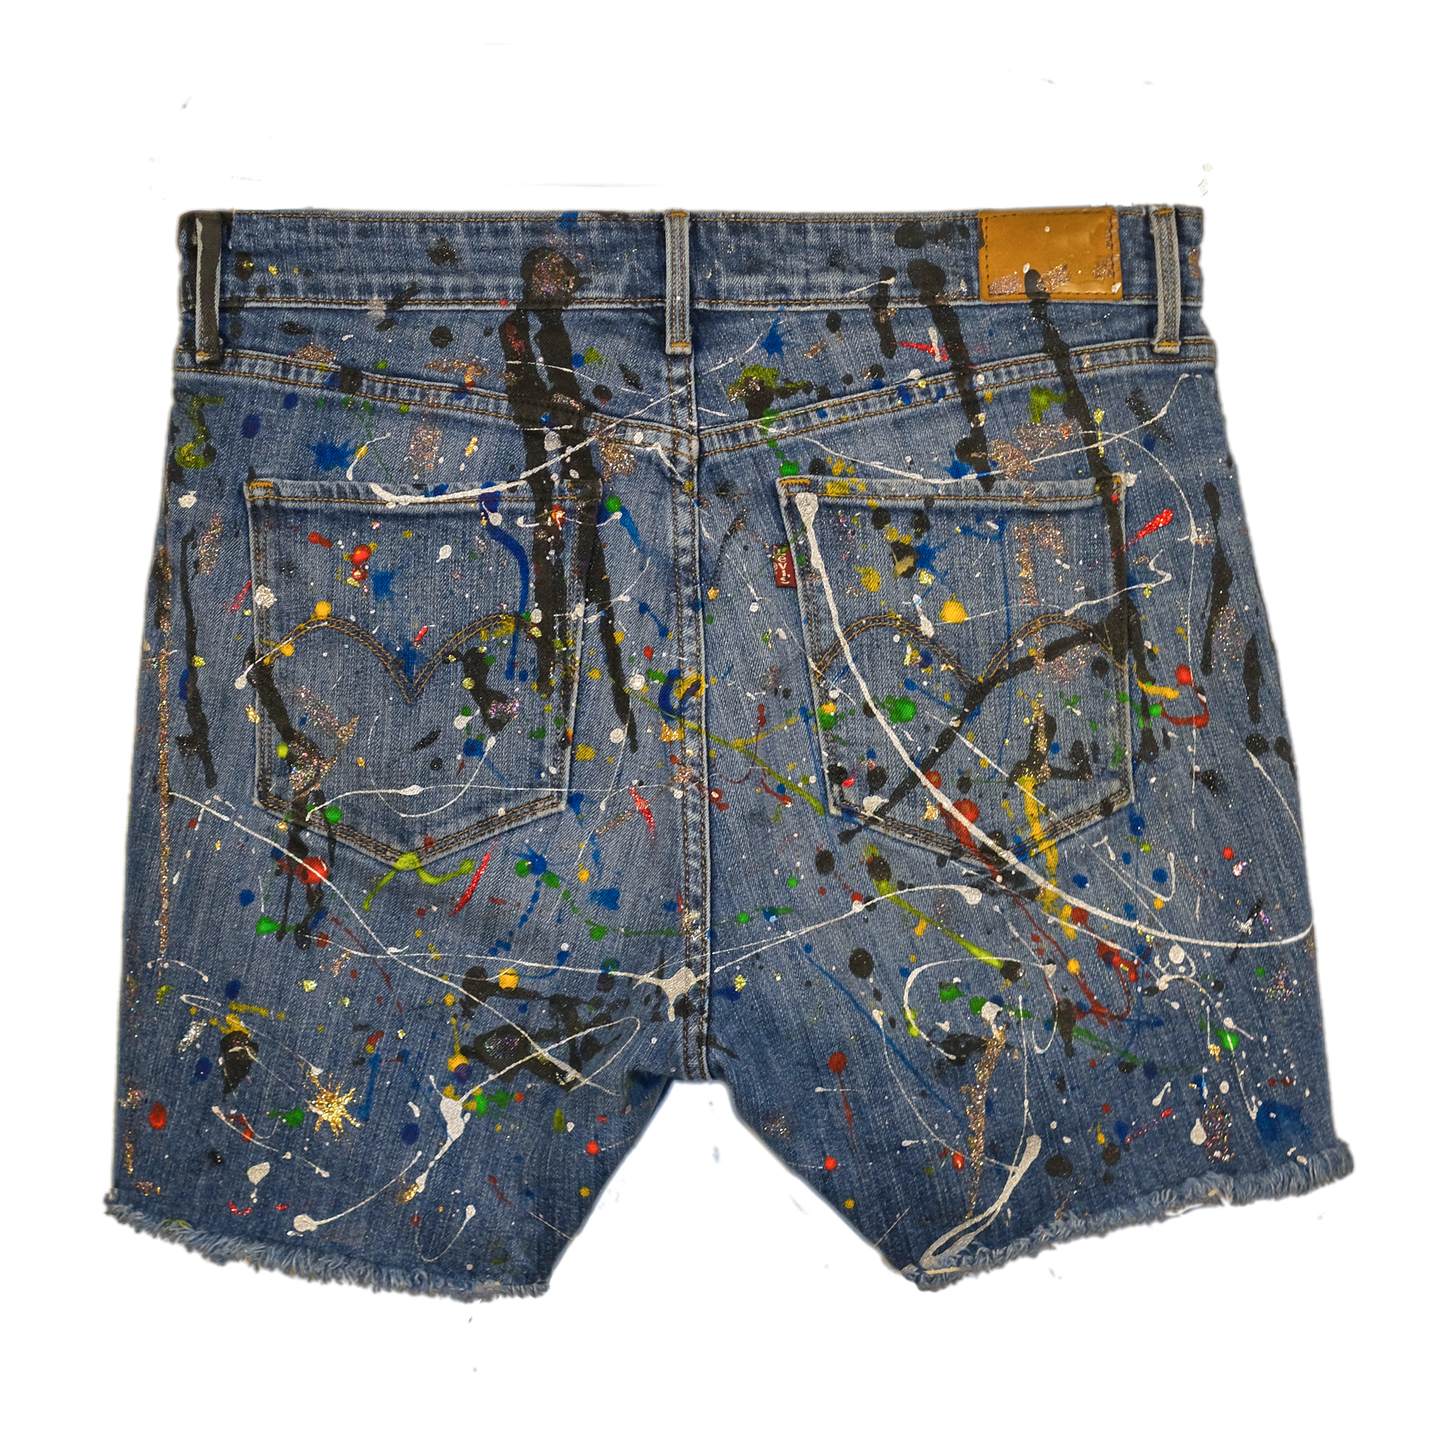 Rainbow Sparkle Up-cycled Cut-off Jean Shorts - Hand-painted by Skye De La Rosa